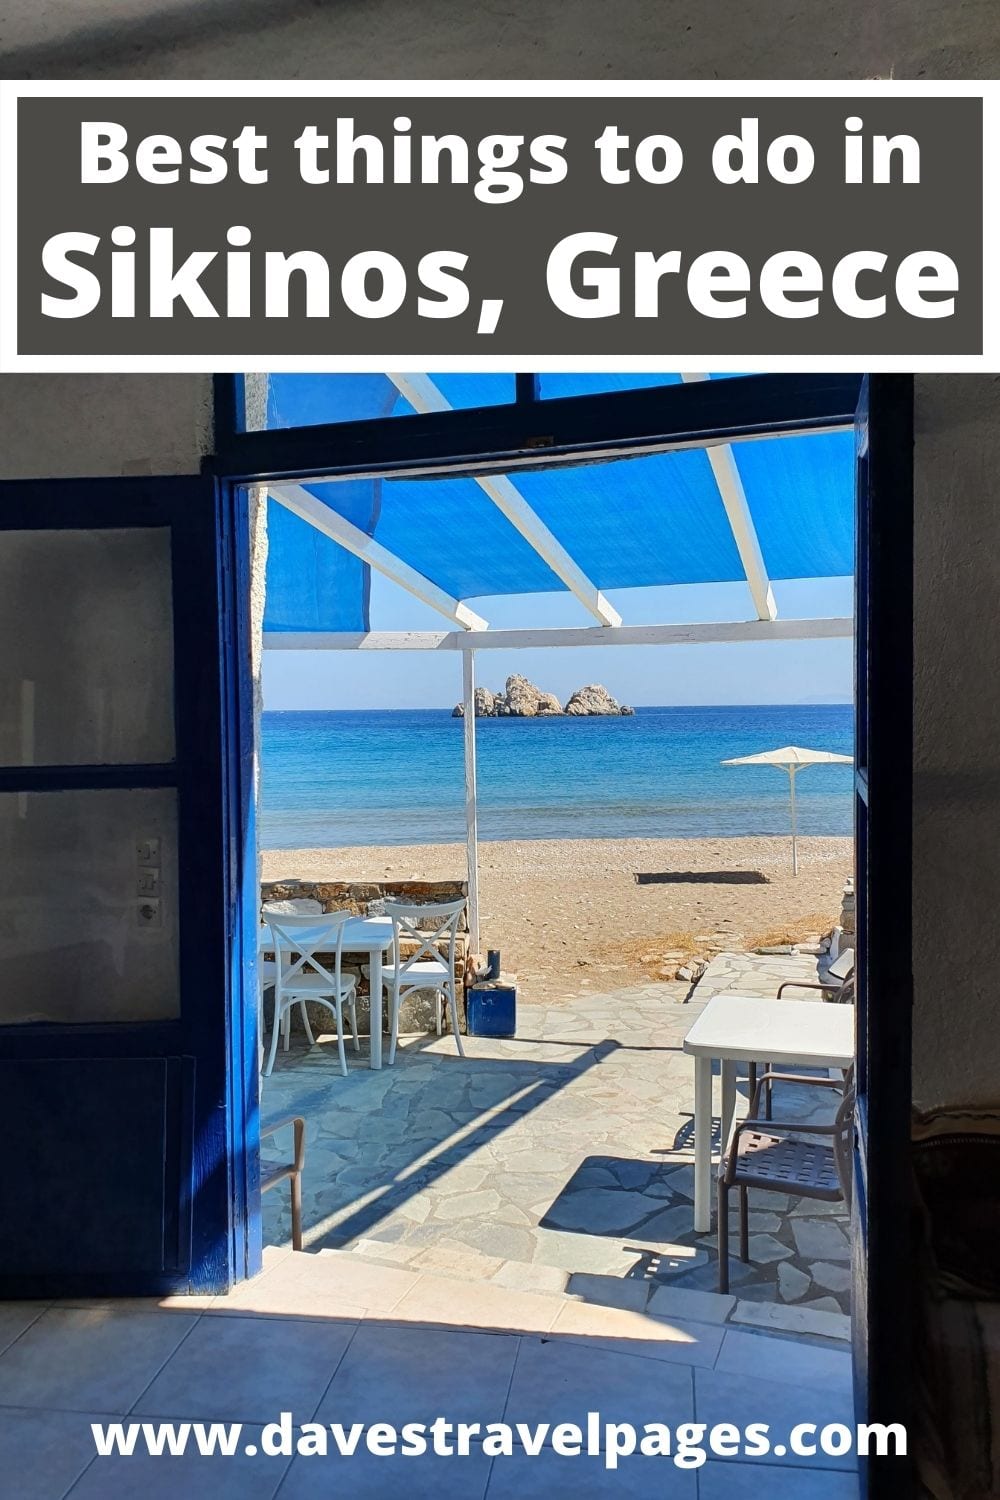 Best things to do in Sikinos Greece - Travel Guide